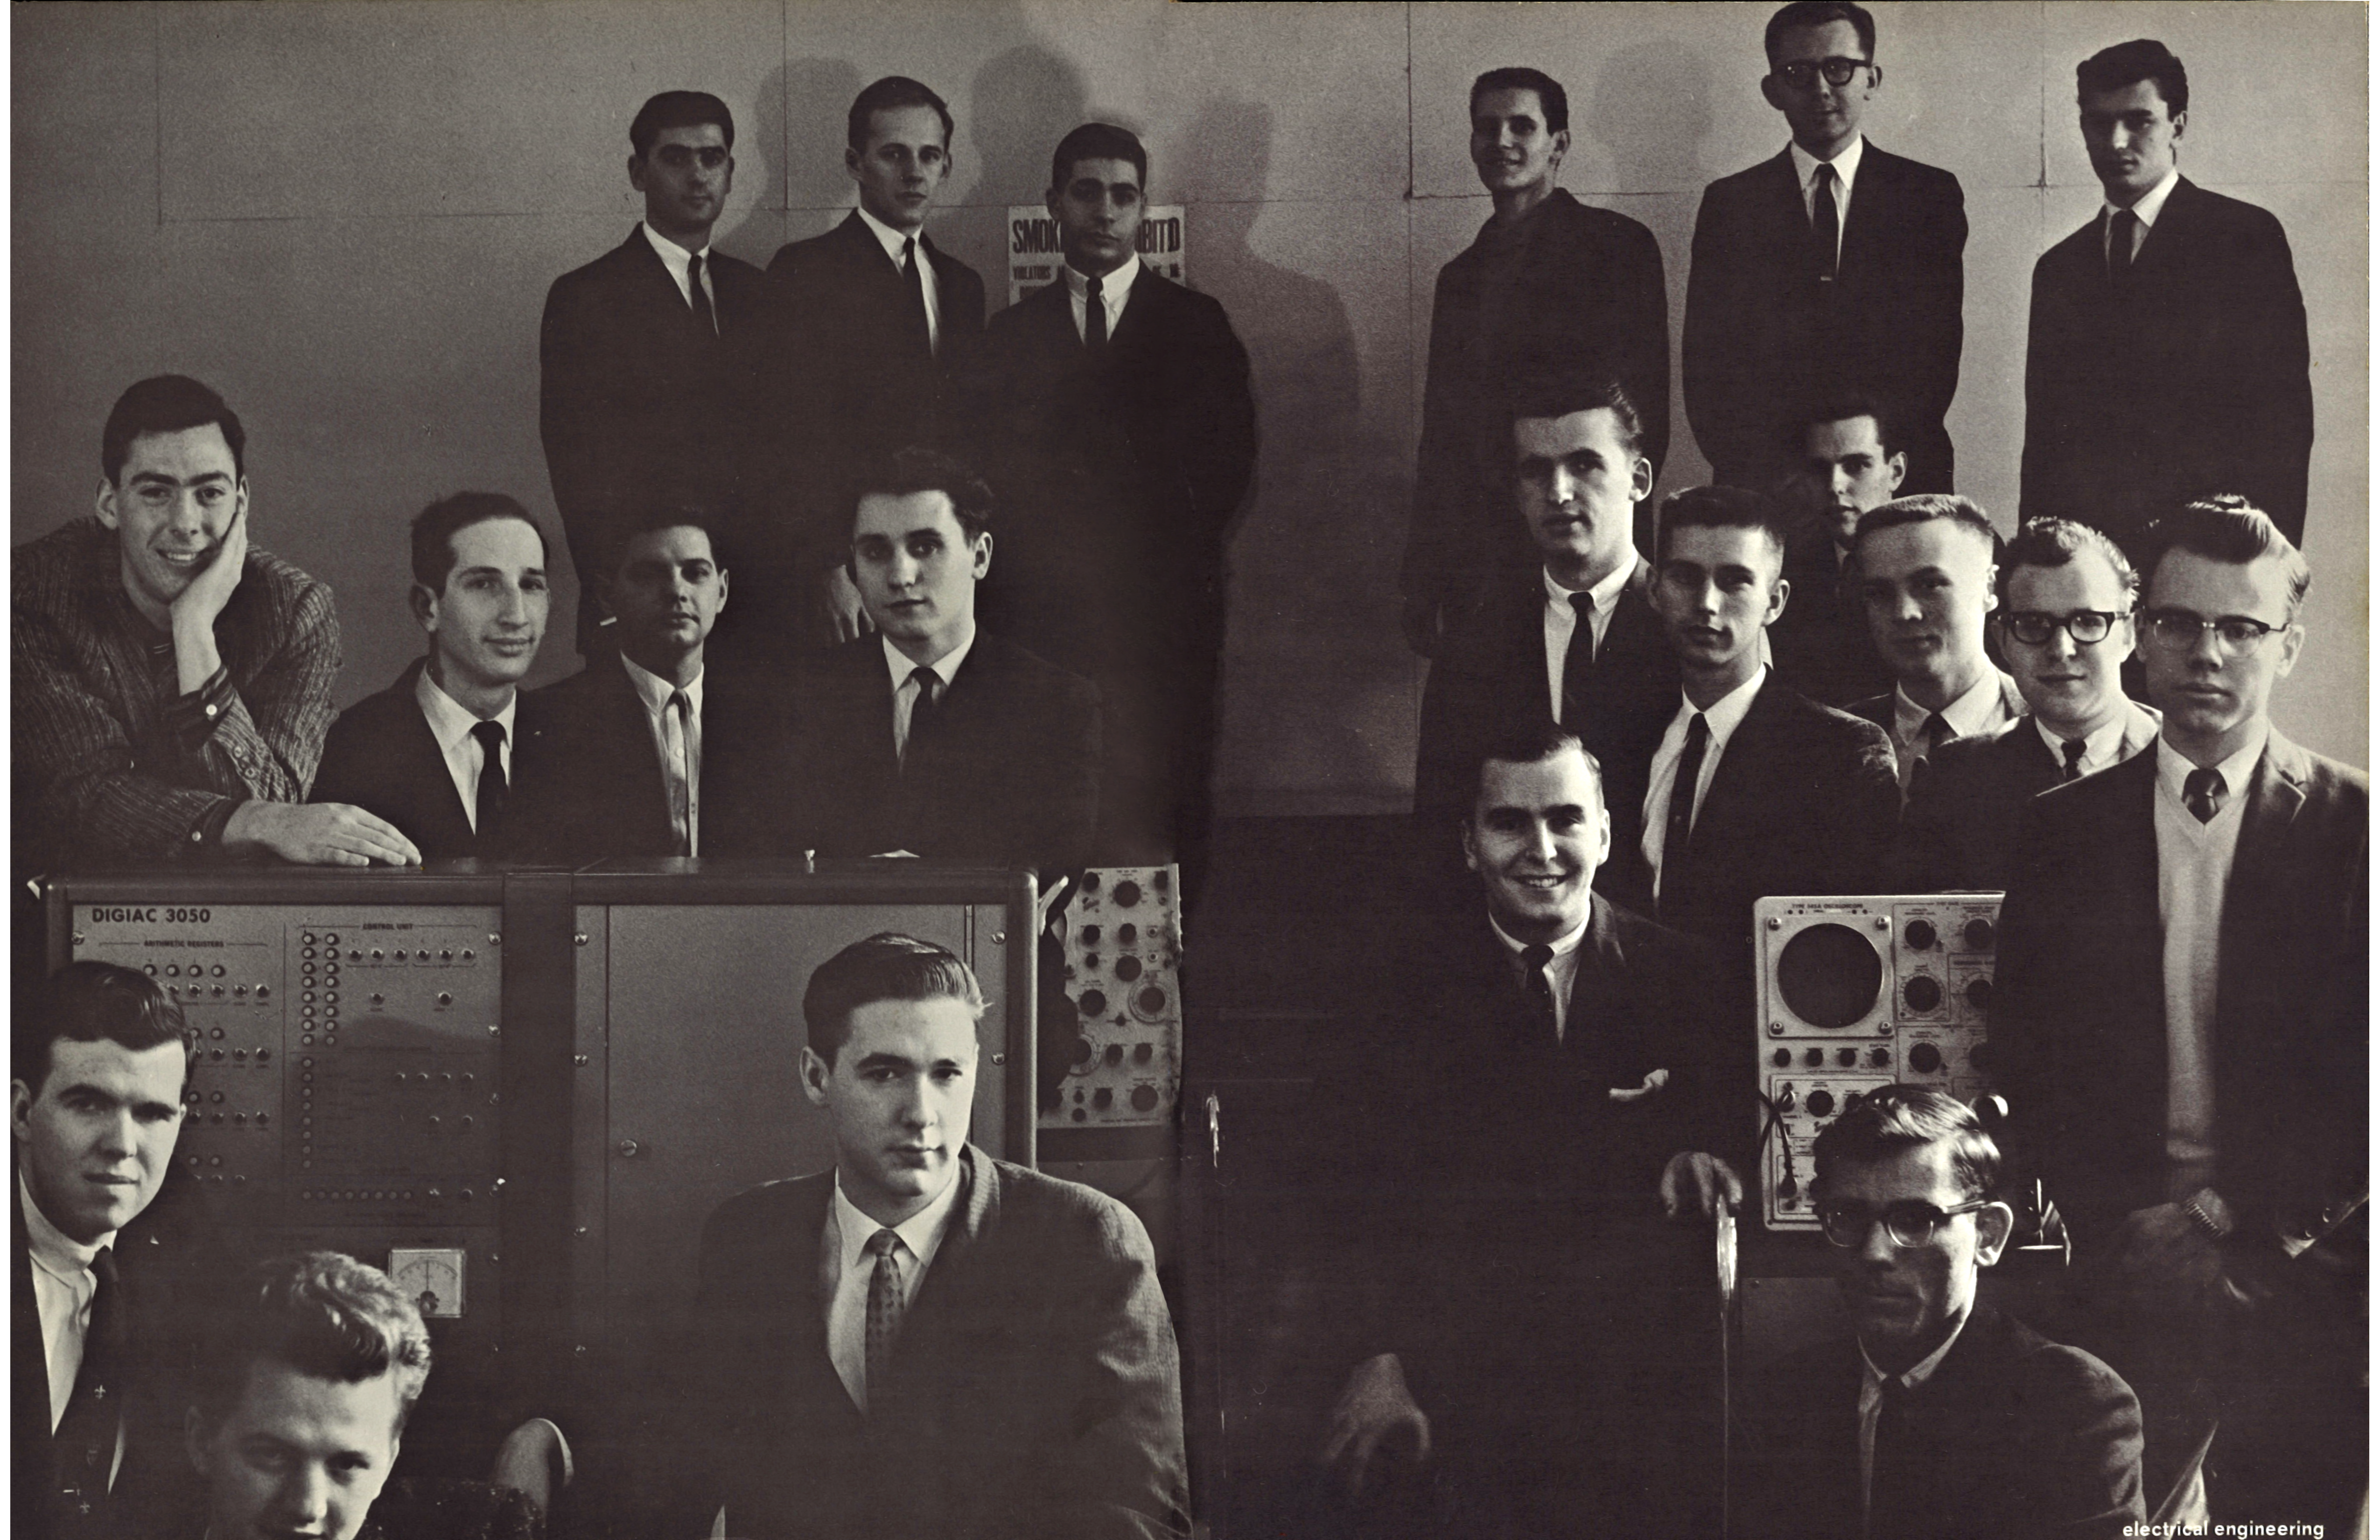 My dad's graduating class in Electrical engineering - Pratt Institute, NY, 1963.png